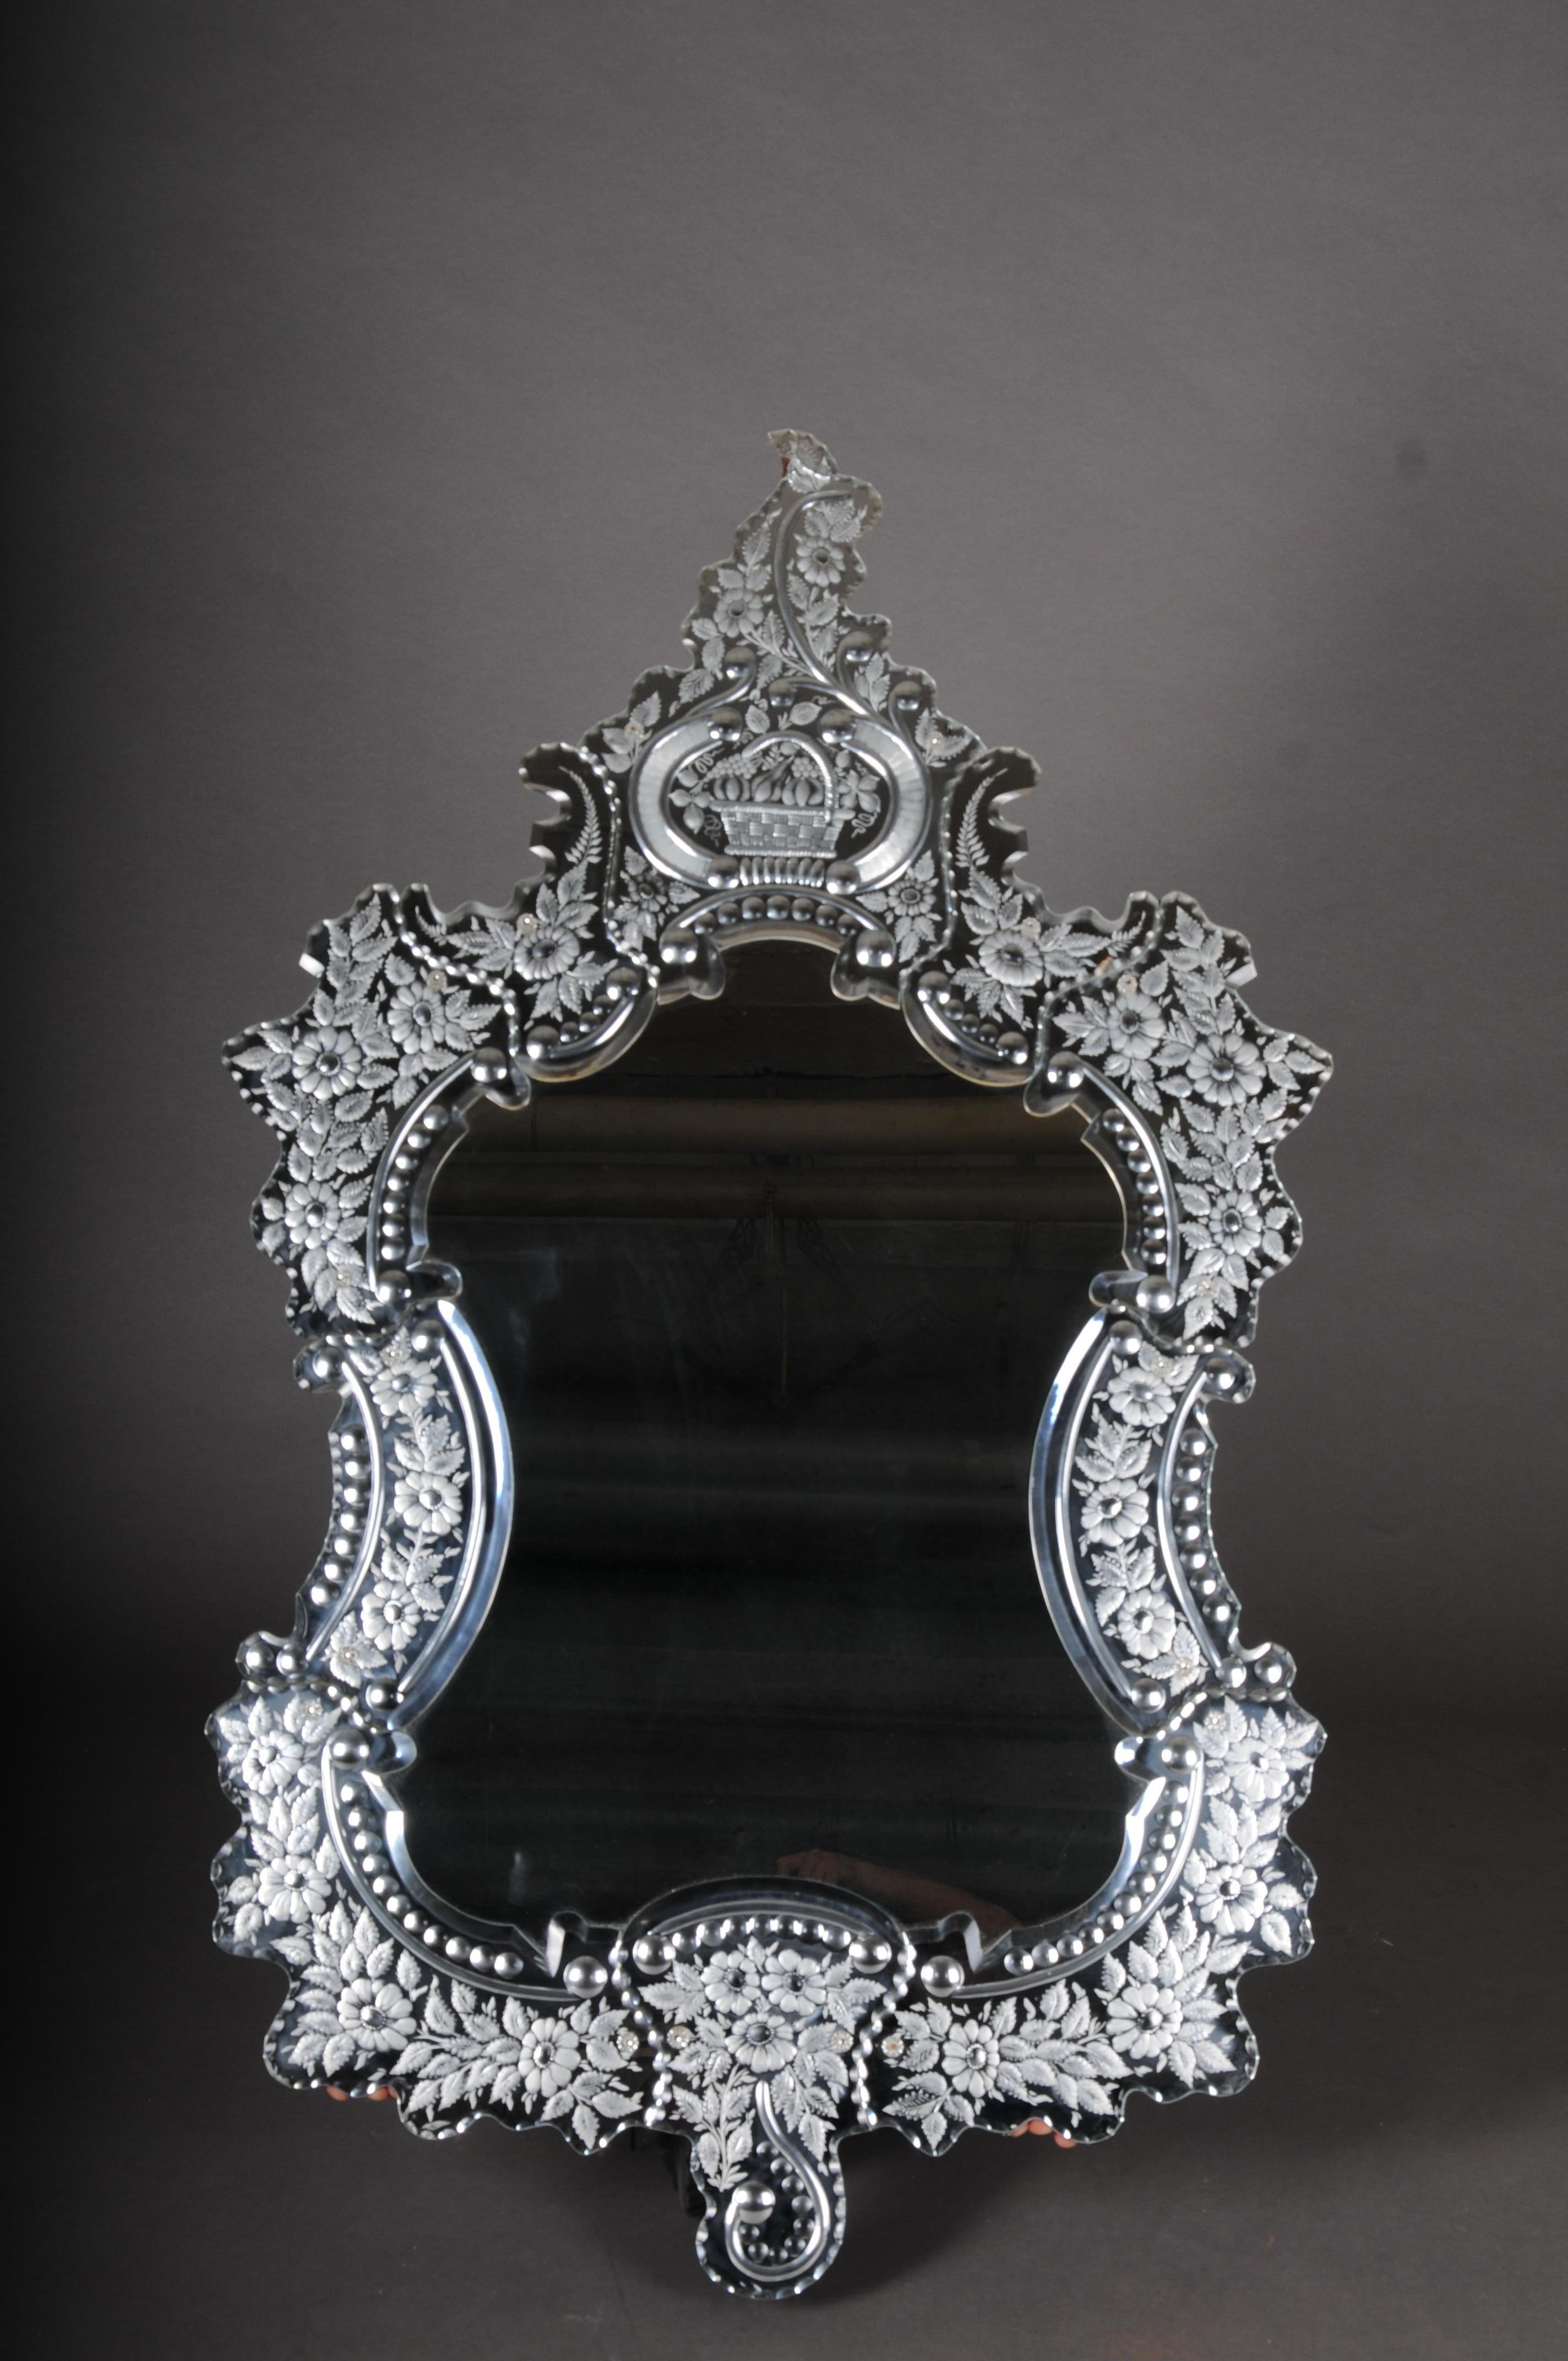 Large Polished Venetian Magnificent Wall Mirror, 20th Century

Finely polished wall mirror, multi-pass curved with a high crown. Circumferentially with floral border. Very impressive and finely polished. Back panel attached with wooden